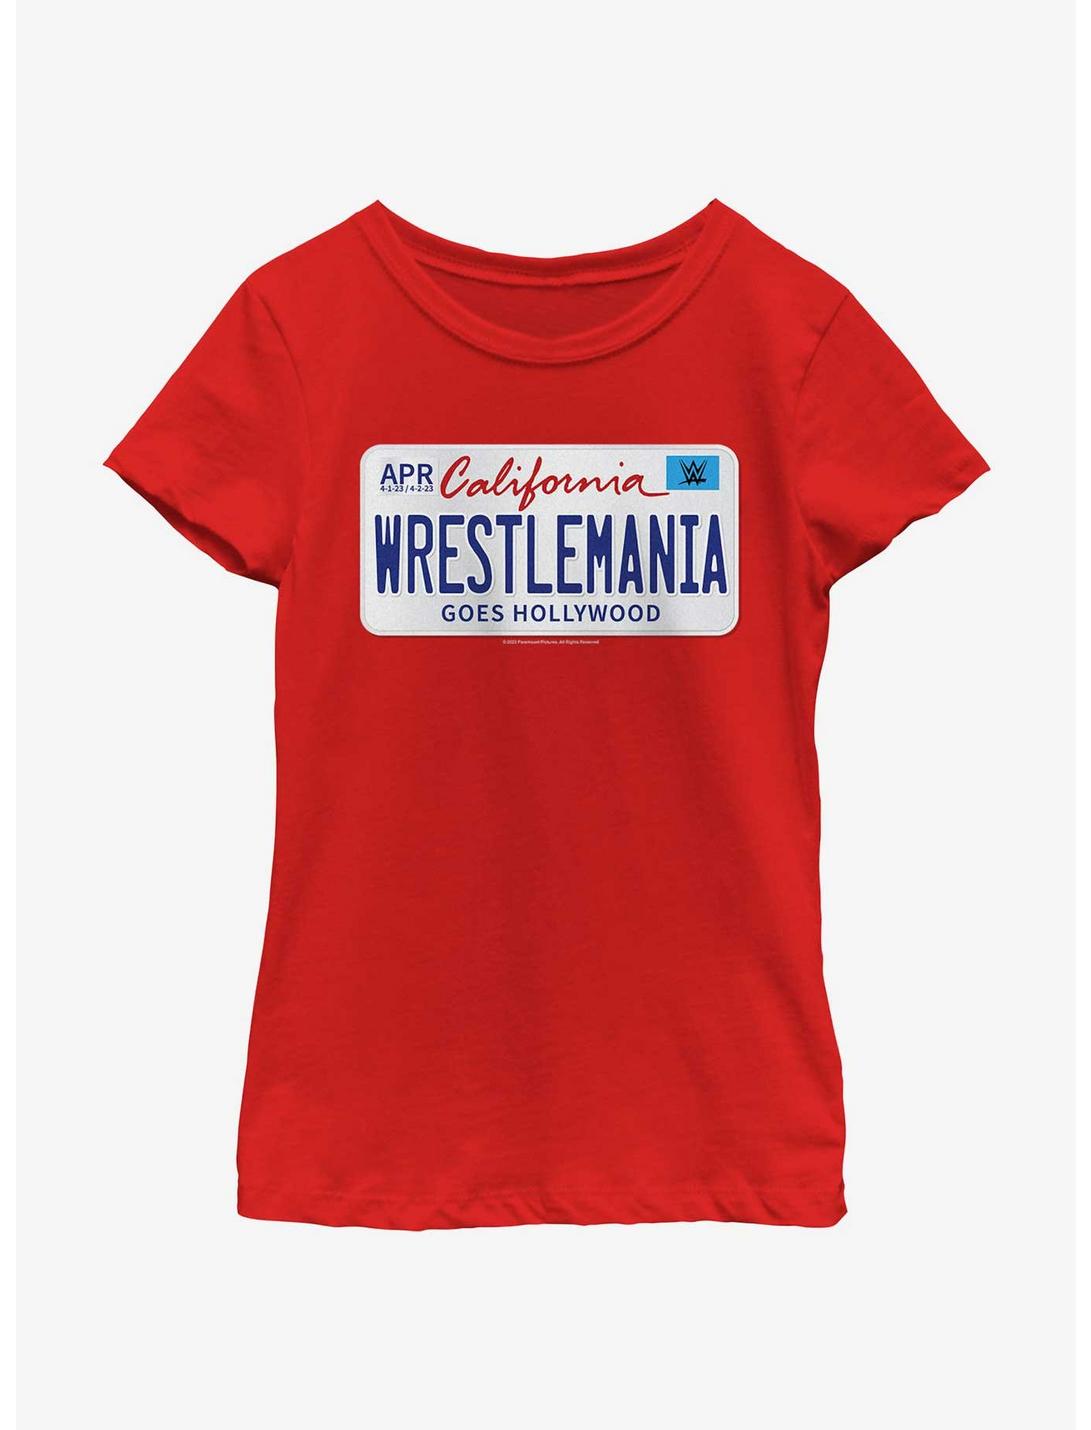 WWE WrestleMania 39 License Plate Logo Youth Girls T-Shirt, RED, hi-res